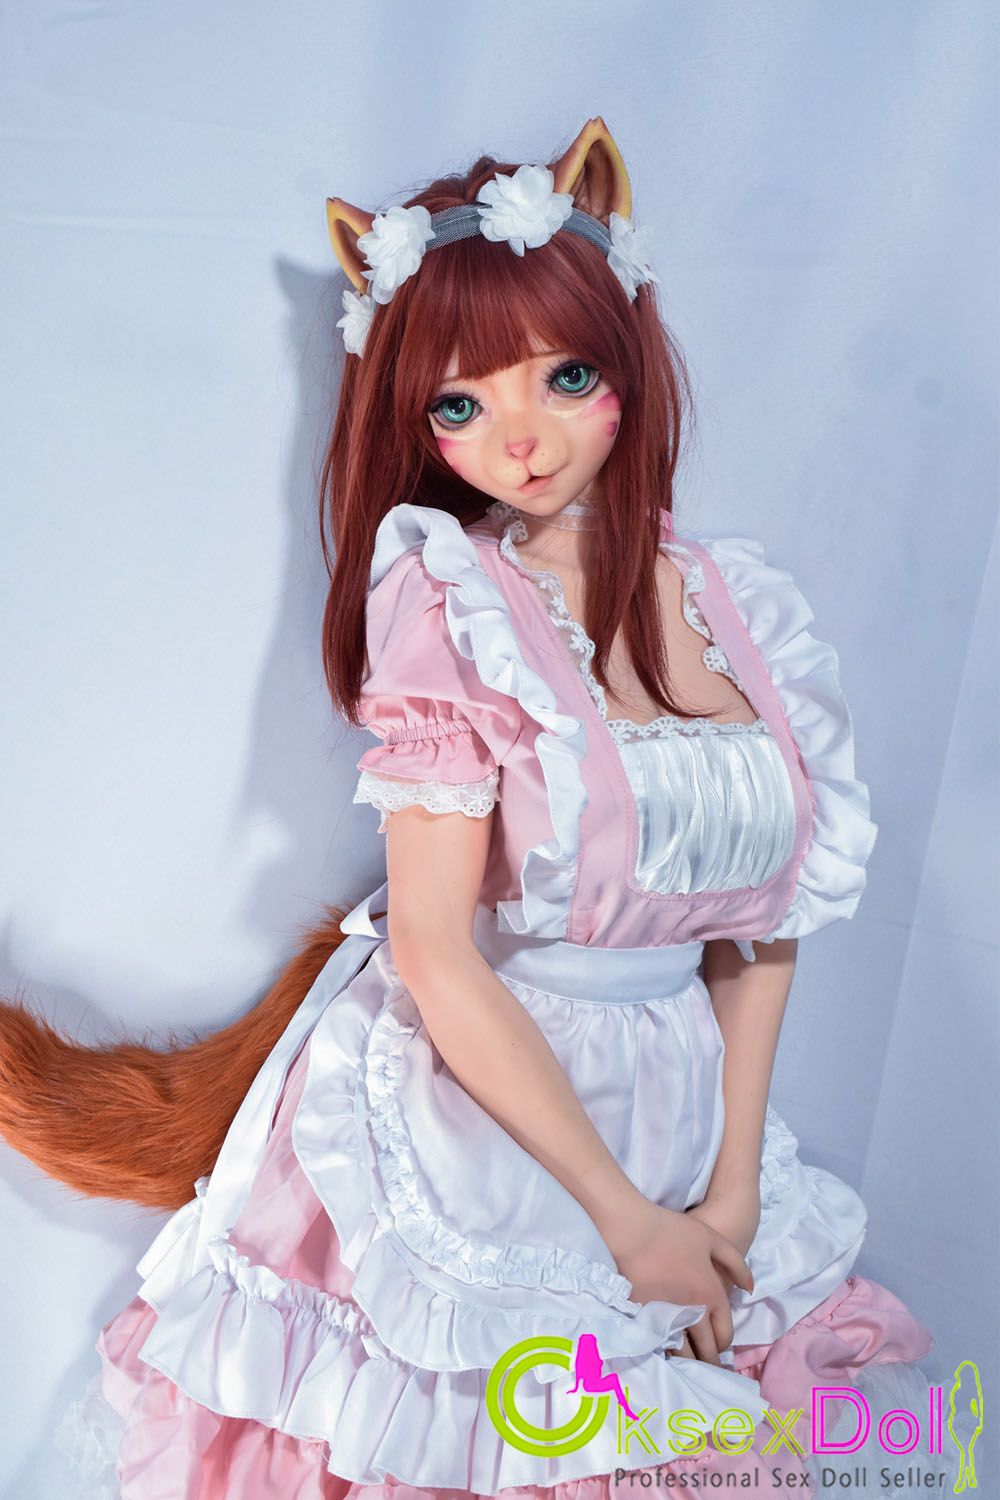 elsababe-doll.html Silicone Doll Gallery